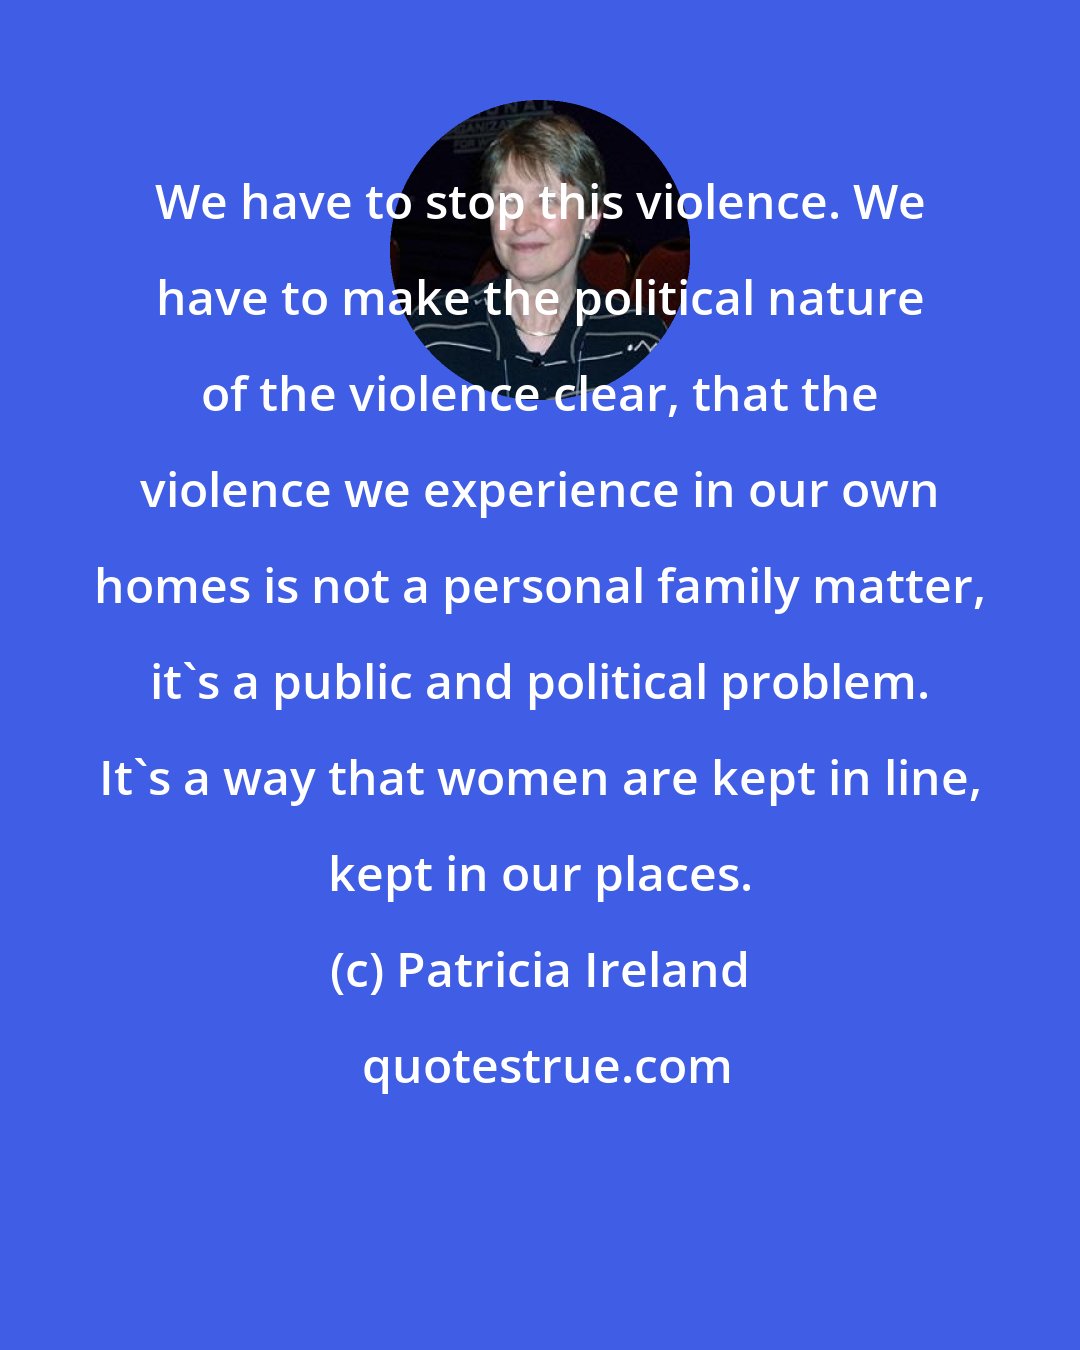 Patricia Ireland: We have to stop this violence. We have to make the political nature of the violence clear, that the violence we experience in our own homes is not a personal family matter, it's a public and political problem. It's a way that women are kept in line, kept in our places.